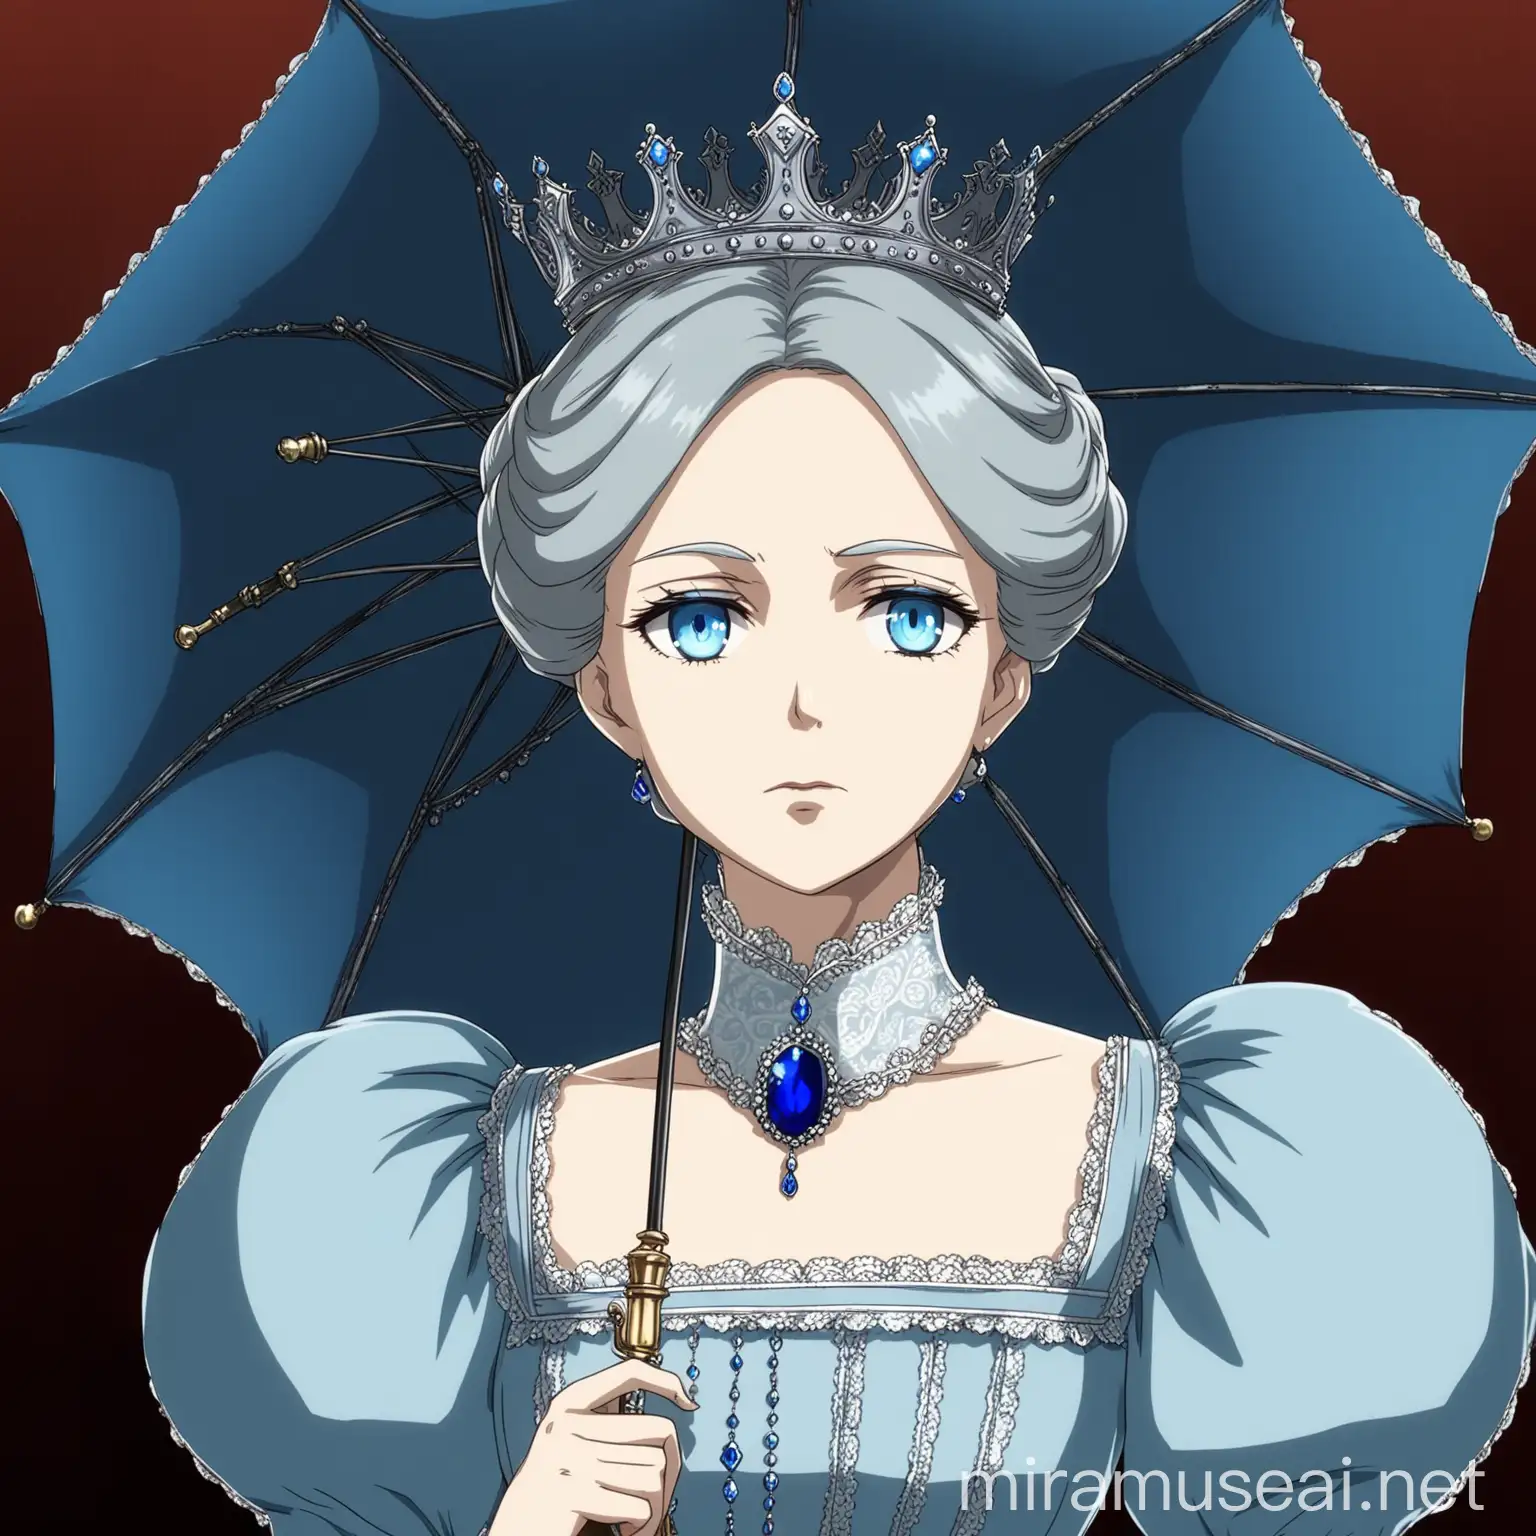 a old queen in victorian style, she has an elegat ponytail, she has an elegant victorian light blue dress, she has blue eyes, she has a little blue umbrella, she has a little silver crown on her head , she has a quiet evil look. in anime